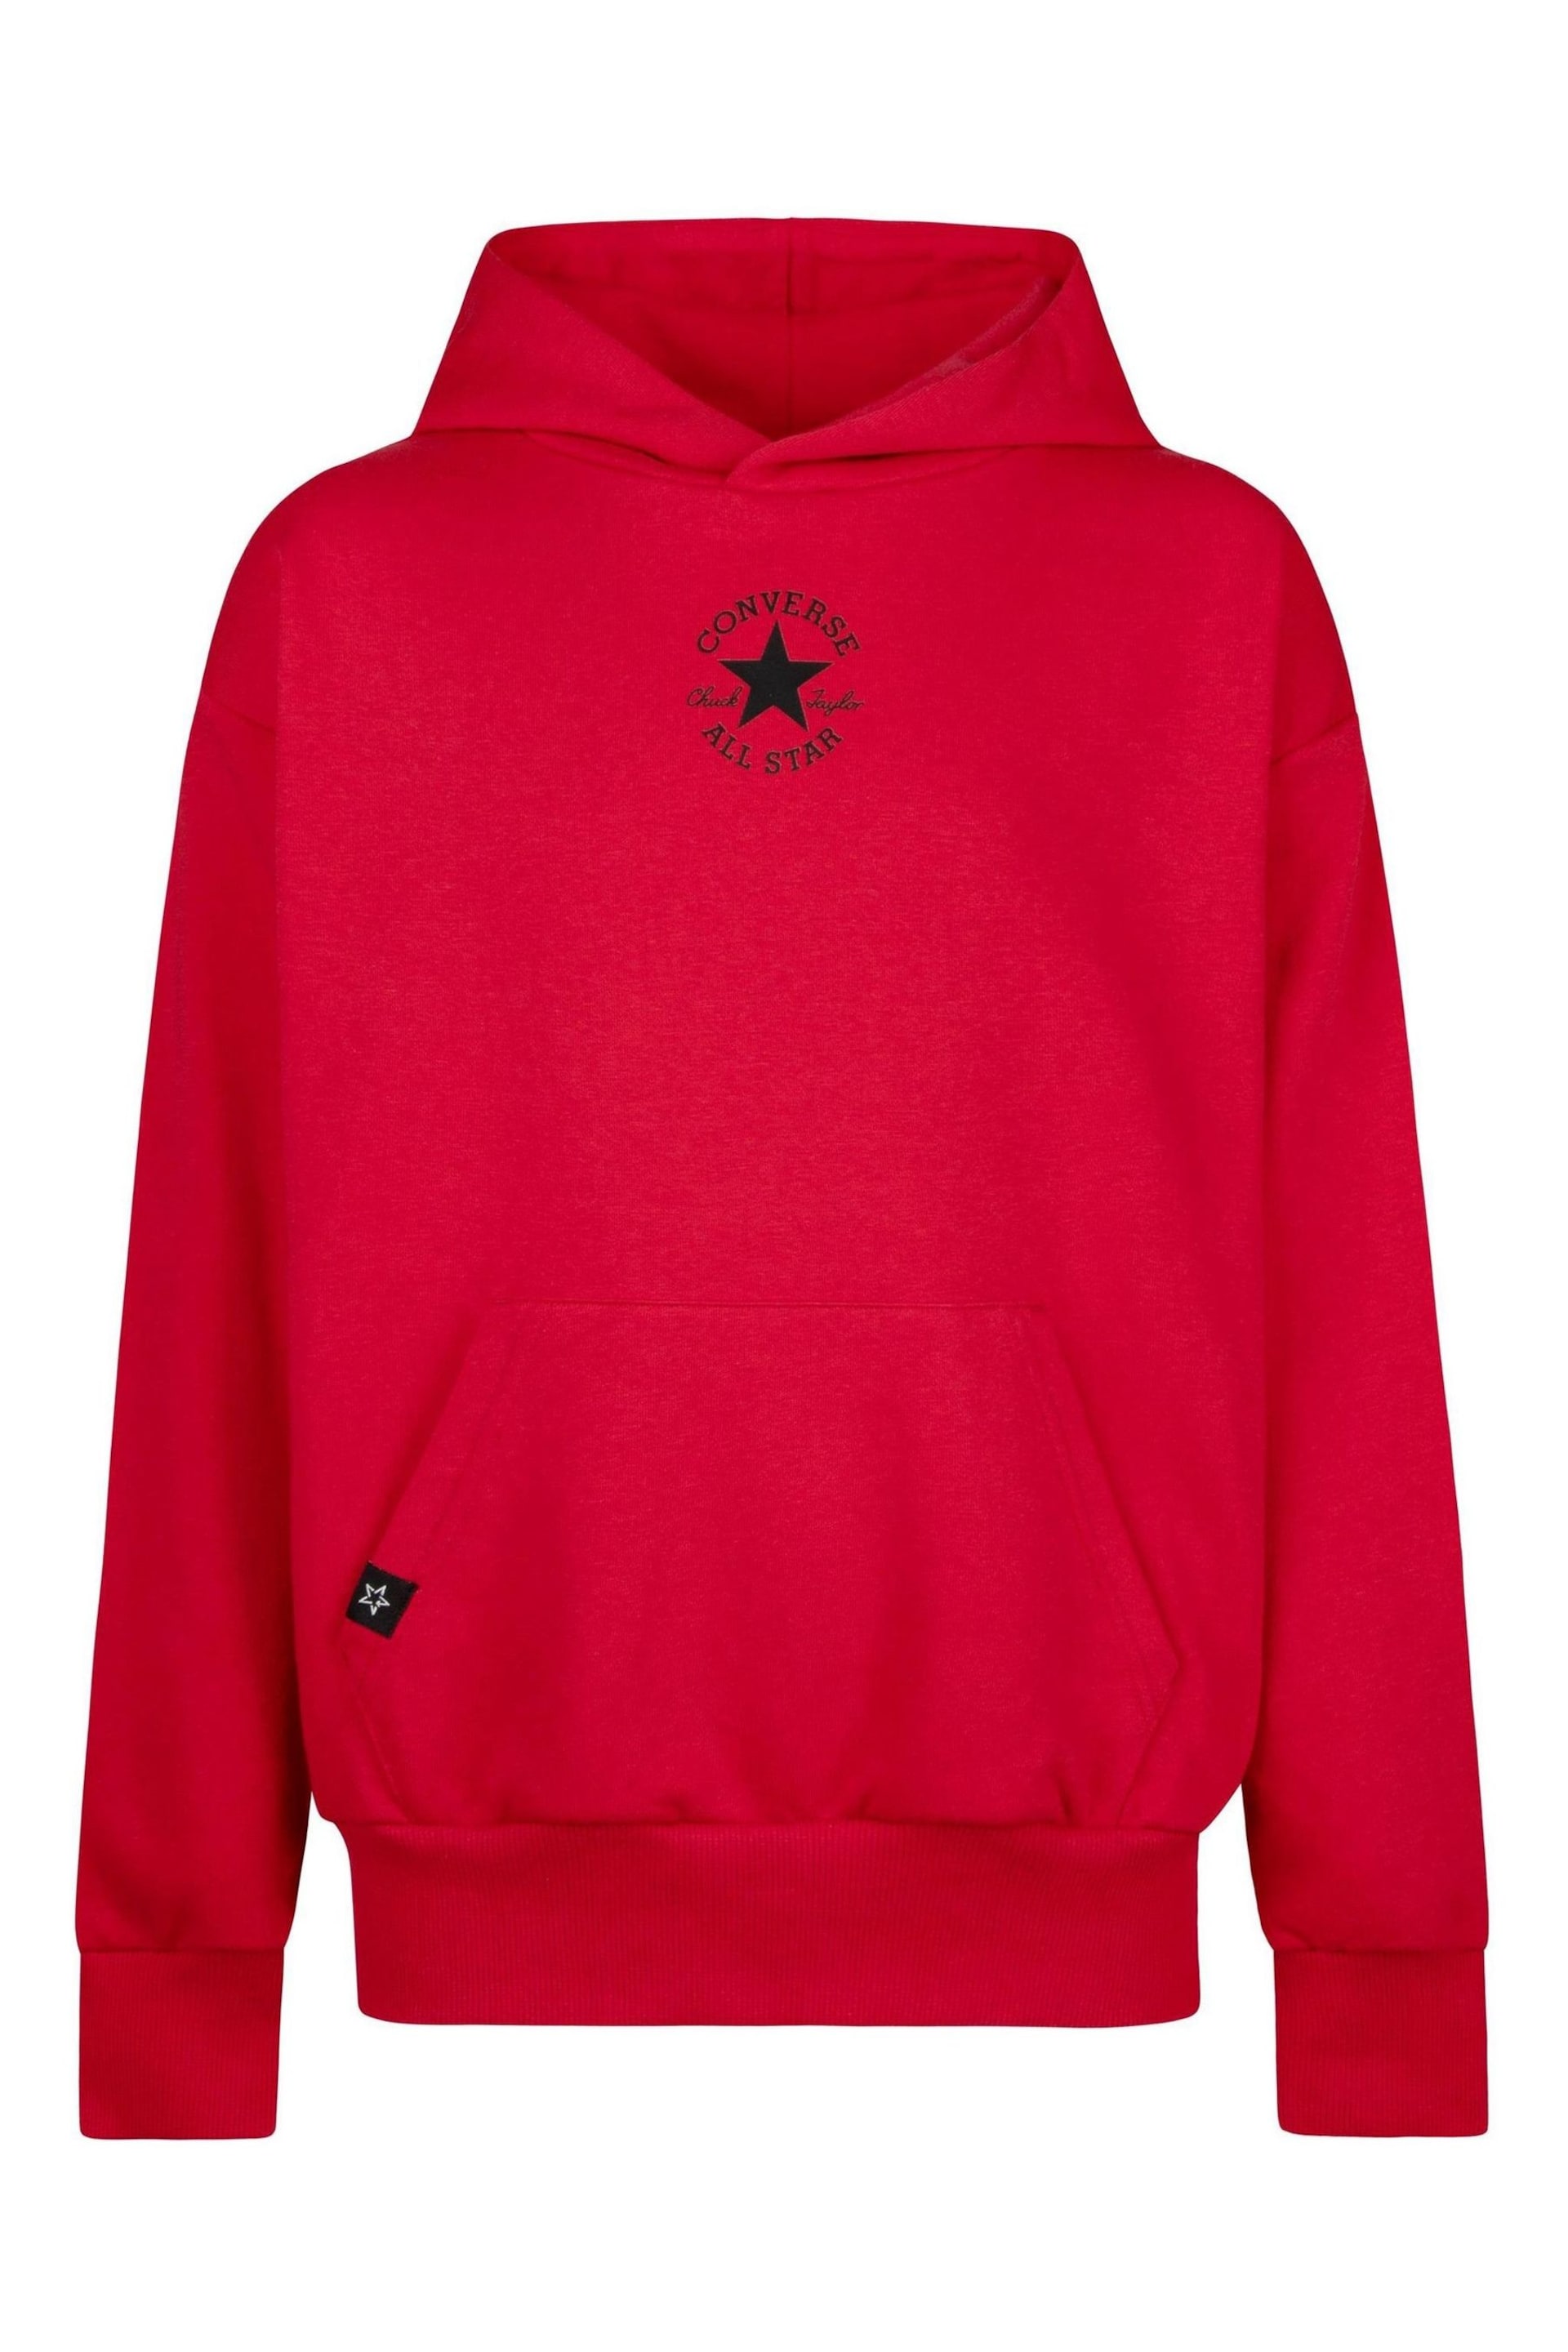 Converse Red Sustainable Core Overhead Hoodie - Image 1 of 4